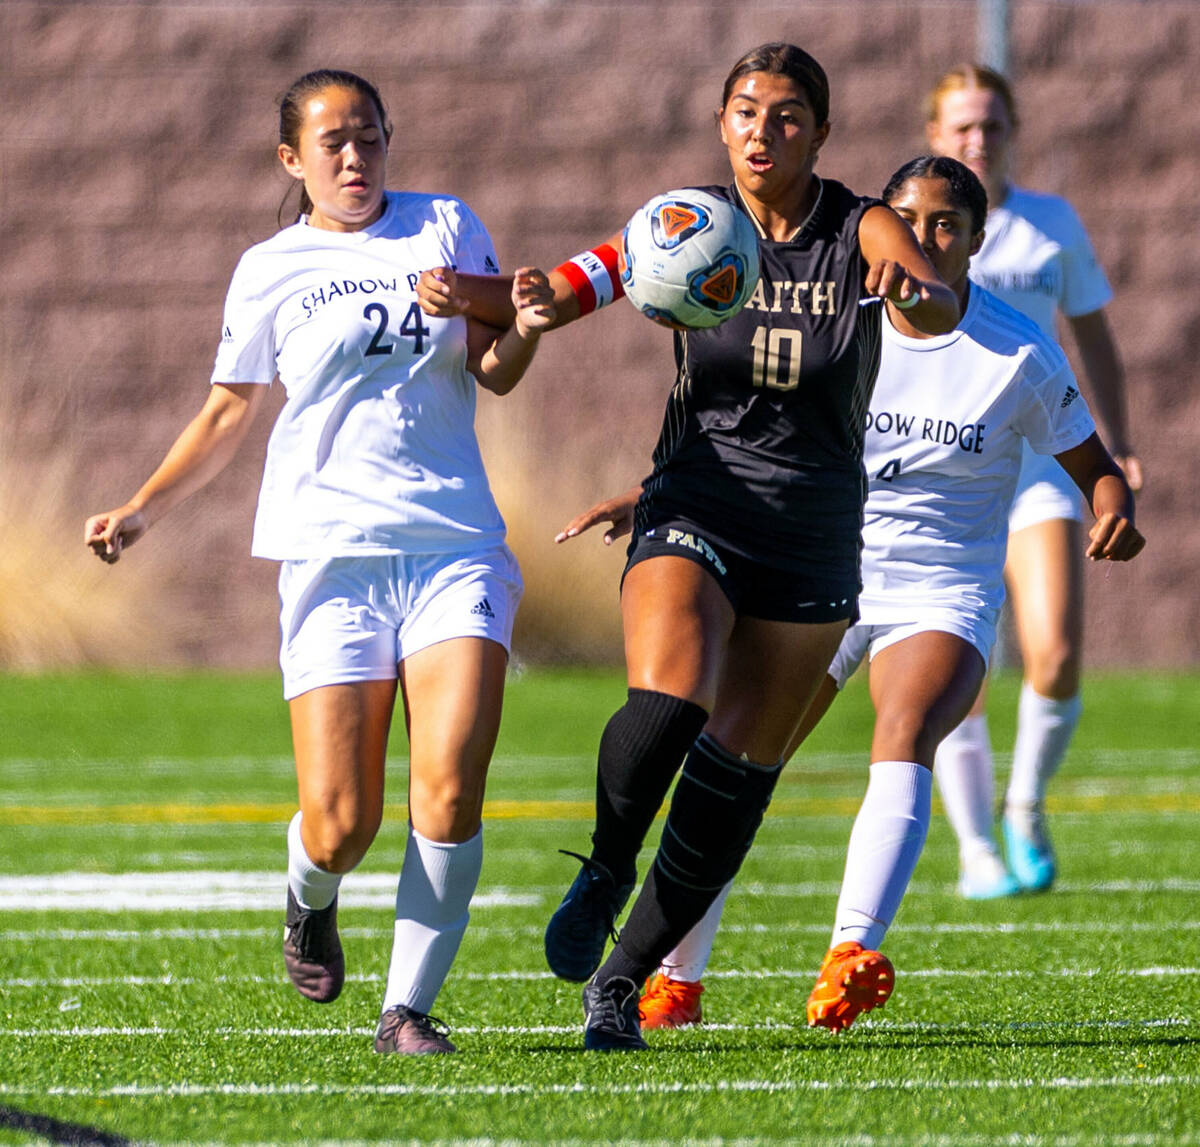 Shadow Ridge midfielder Leighanne Kim (24) fights for the ball while pushed by Faith Lutheran m ...